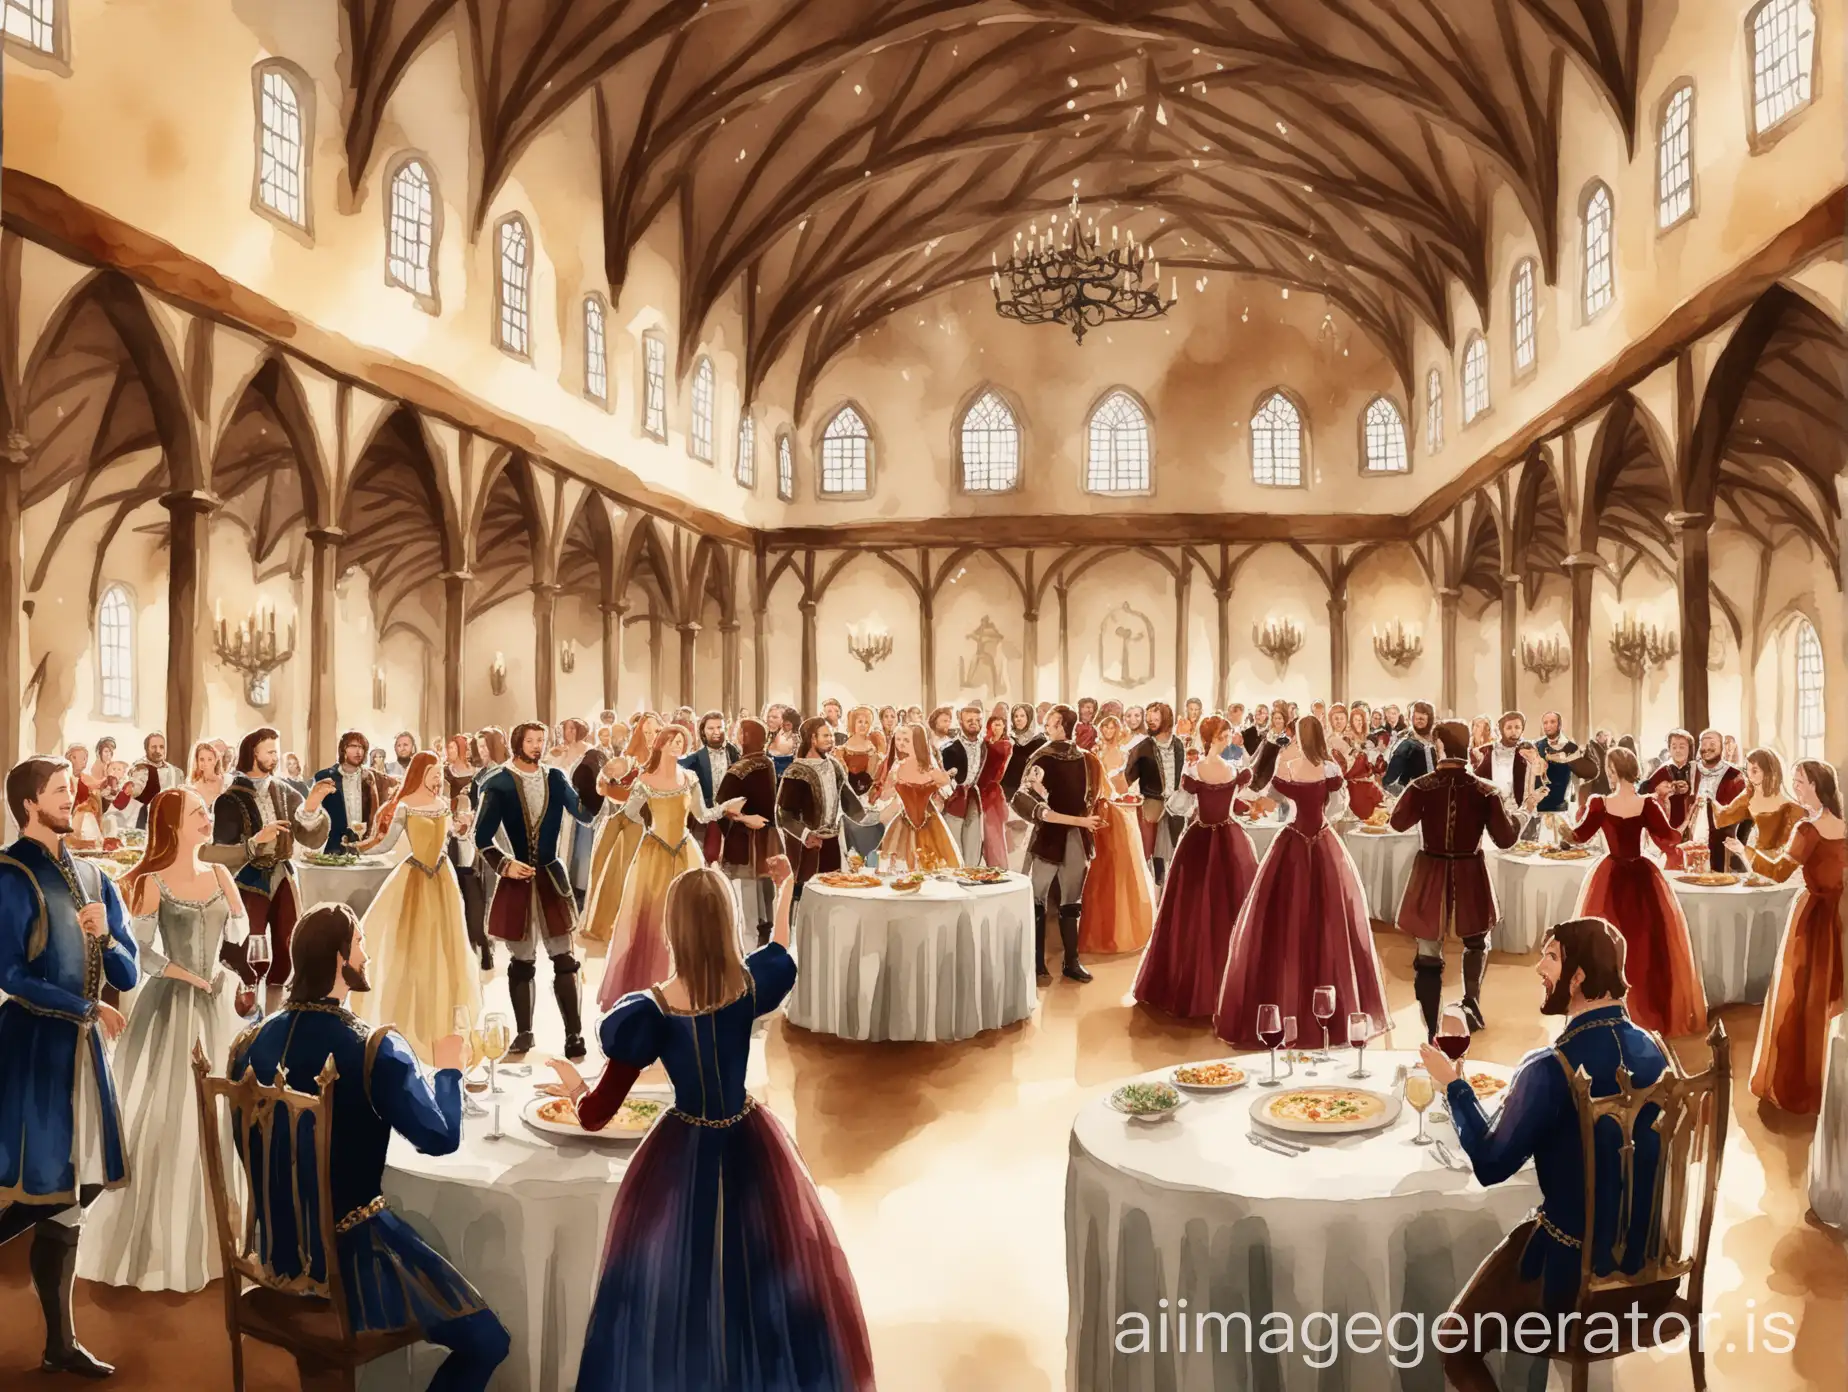 Medieval-European-High-Society-Banquet-Revelry-in-a-Luxurious-Hall